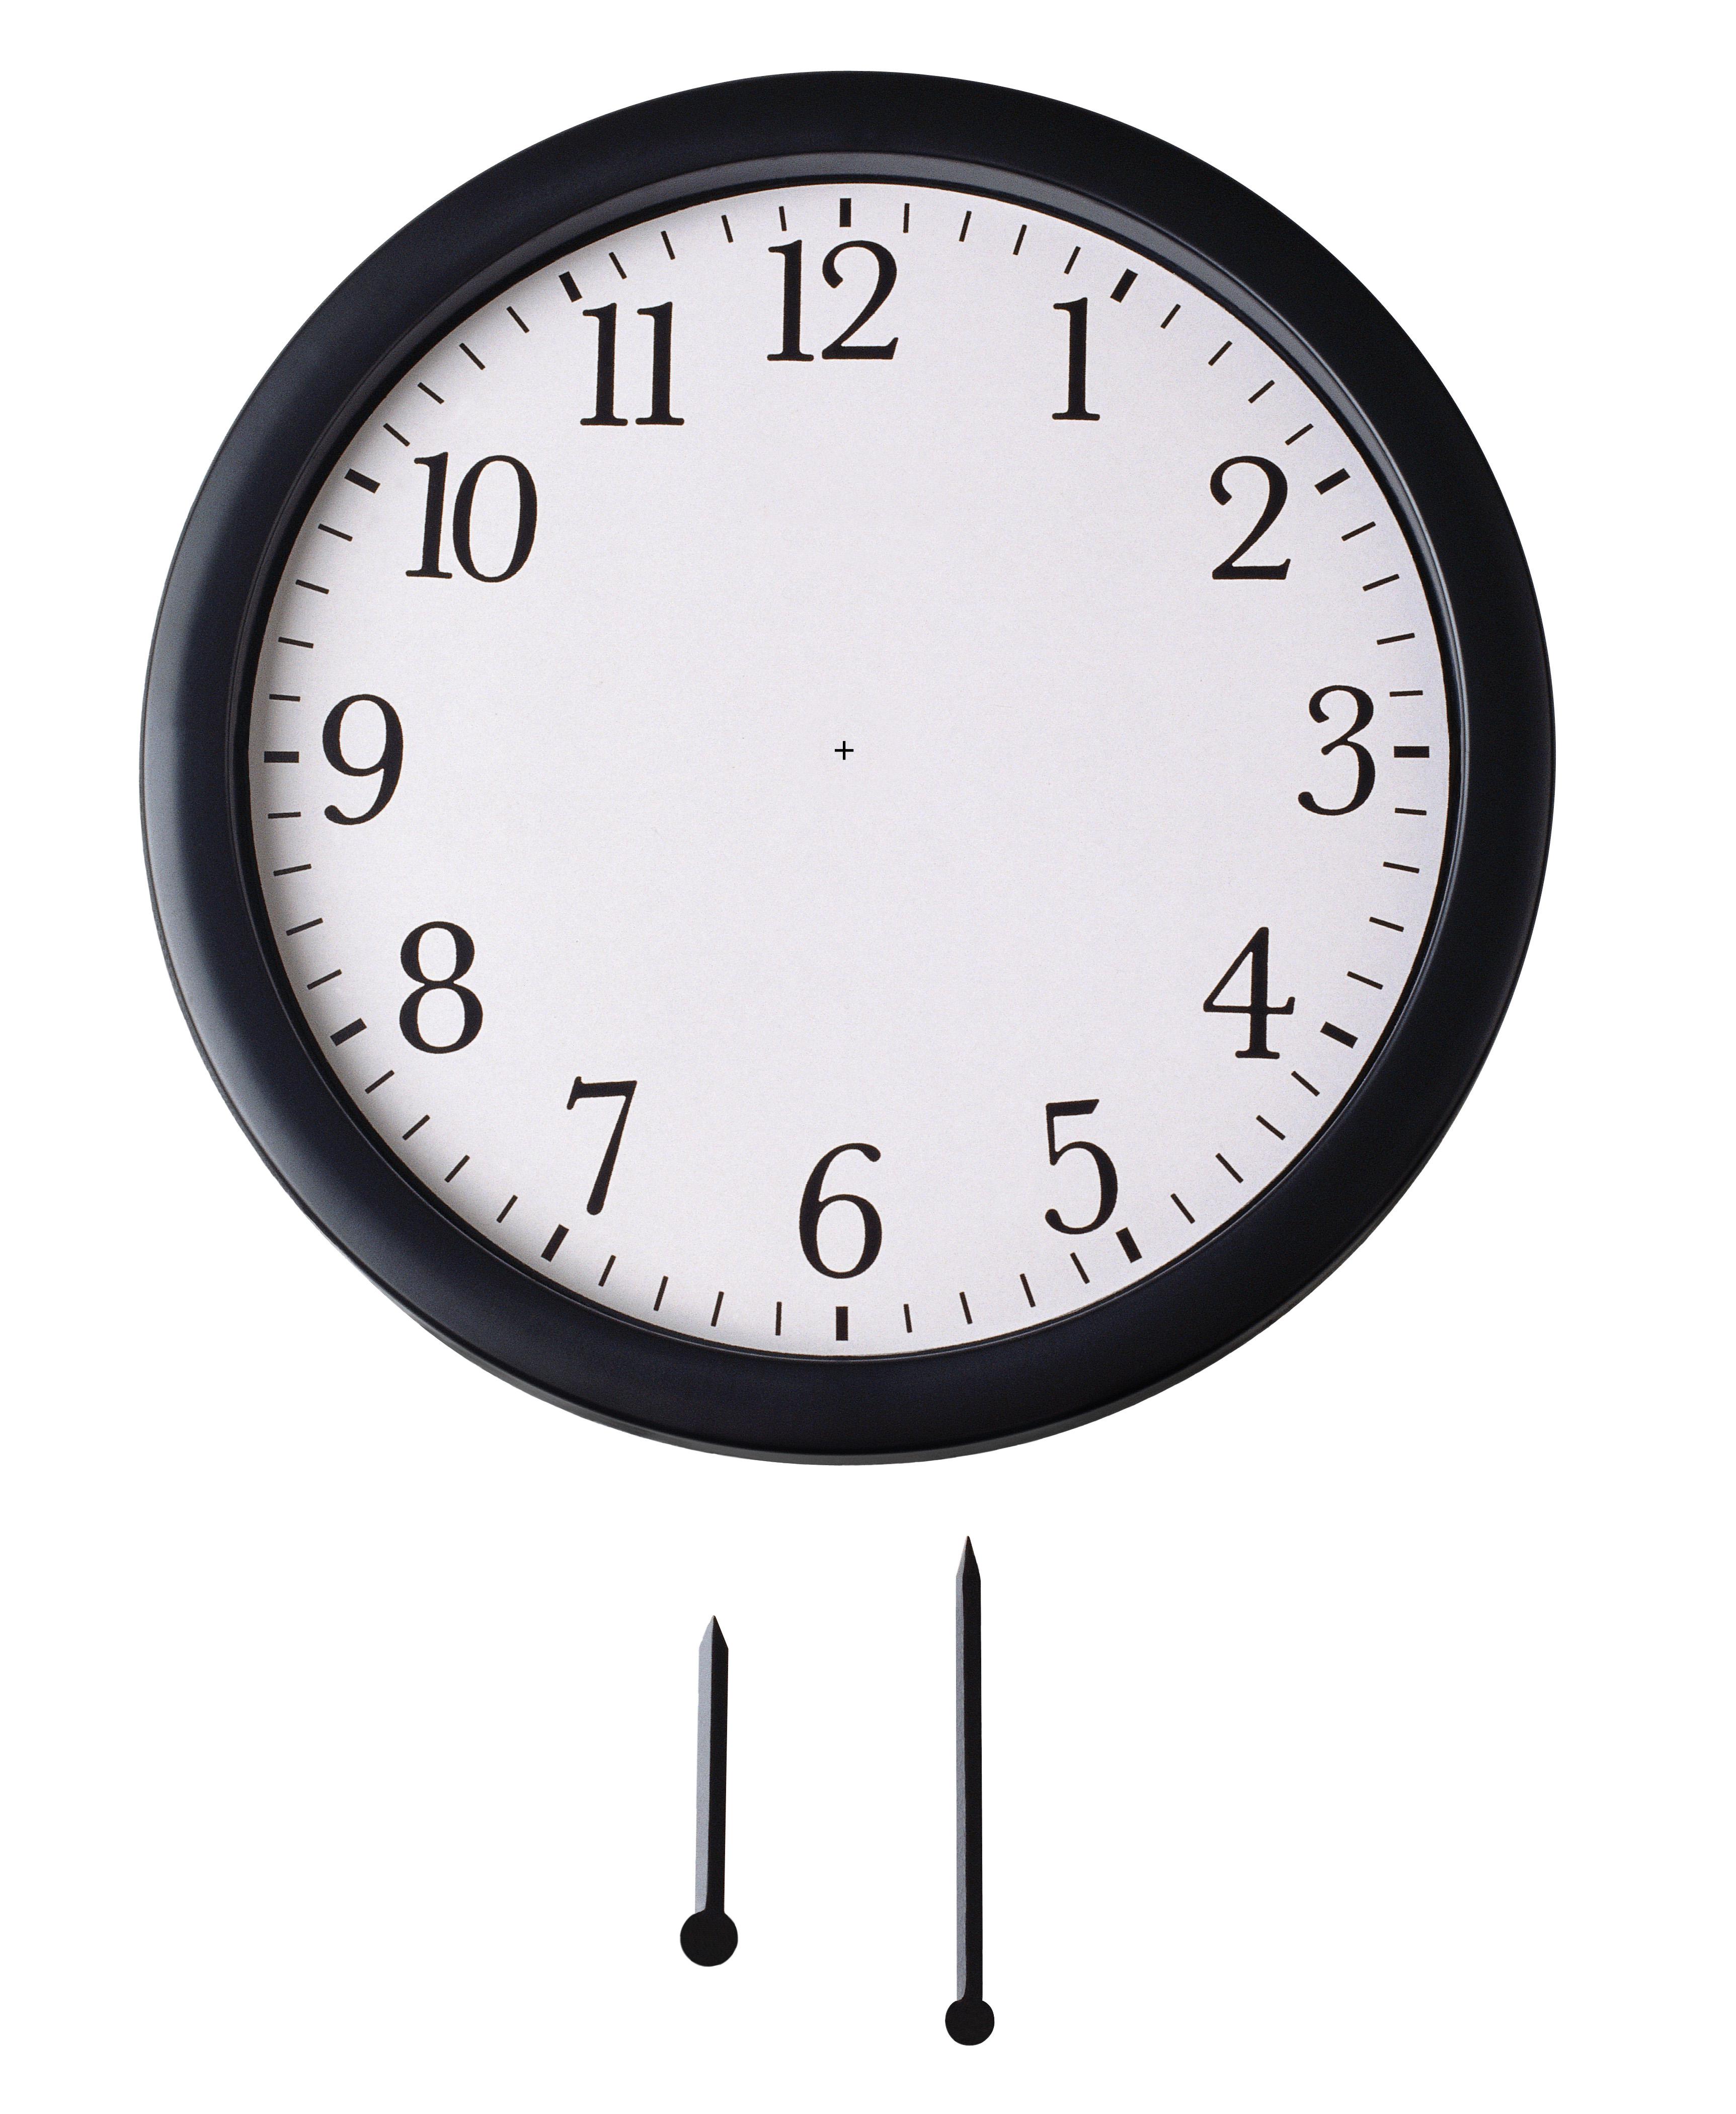 Front view of wall clock with hour hand and minute hand underneath